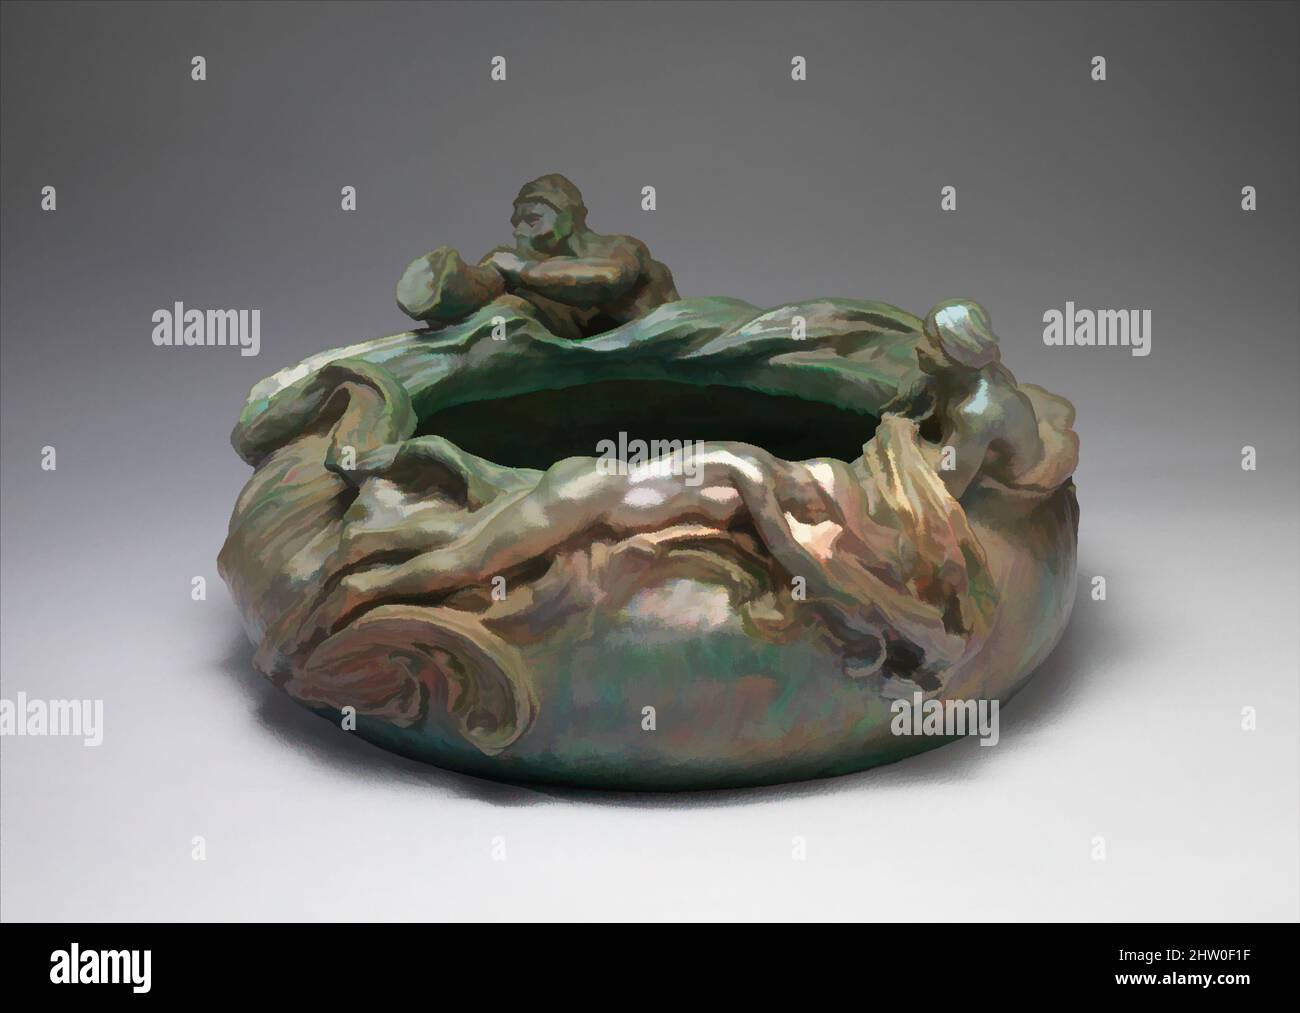 Art inspired by Sculptural bowl, 1900, Stoneware, 10 7/8 × 21 3/4 in. (27.6 × 55.2 cm), Ceramics-Pottery, James Vibert (Swiss, 1872–1917), Massier specialized in pottery with a metallic iridescent glaze inspired by medieval Spanish lusterware. This bowl is the product of his, Classic works modernized by Artotop with a splash of modernity. Shapes, color and value, eye-catching visual impact on art. Emotions through freedom of artworks in a contemporary way. A timeless message pursuing a wildly creative new direction. Artists turning to the digital medium and creating the Artotop NFT Stock Photo